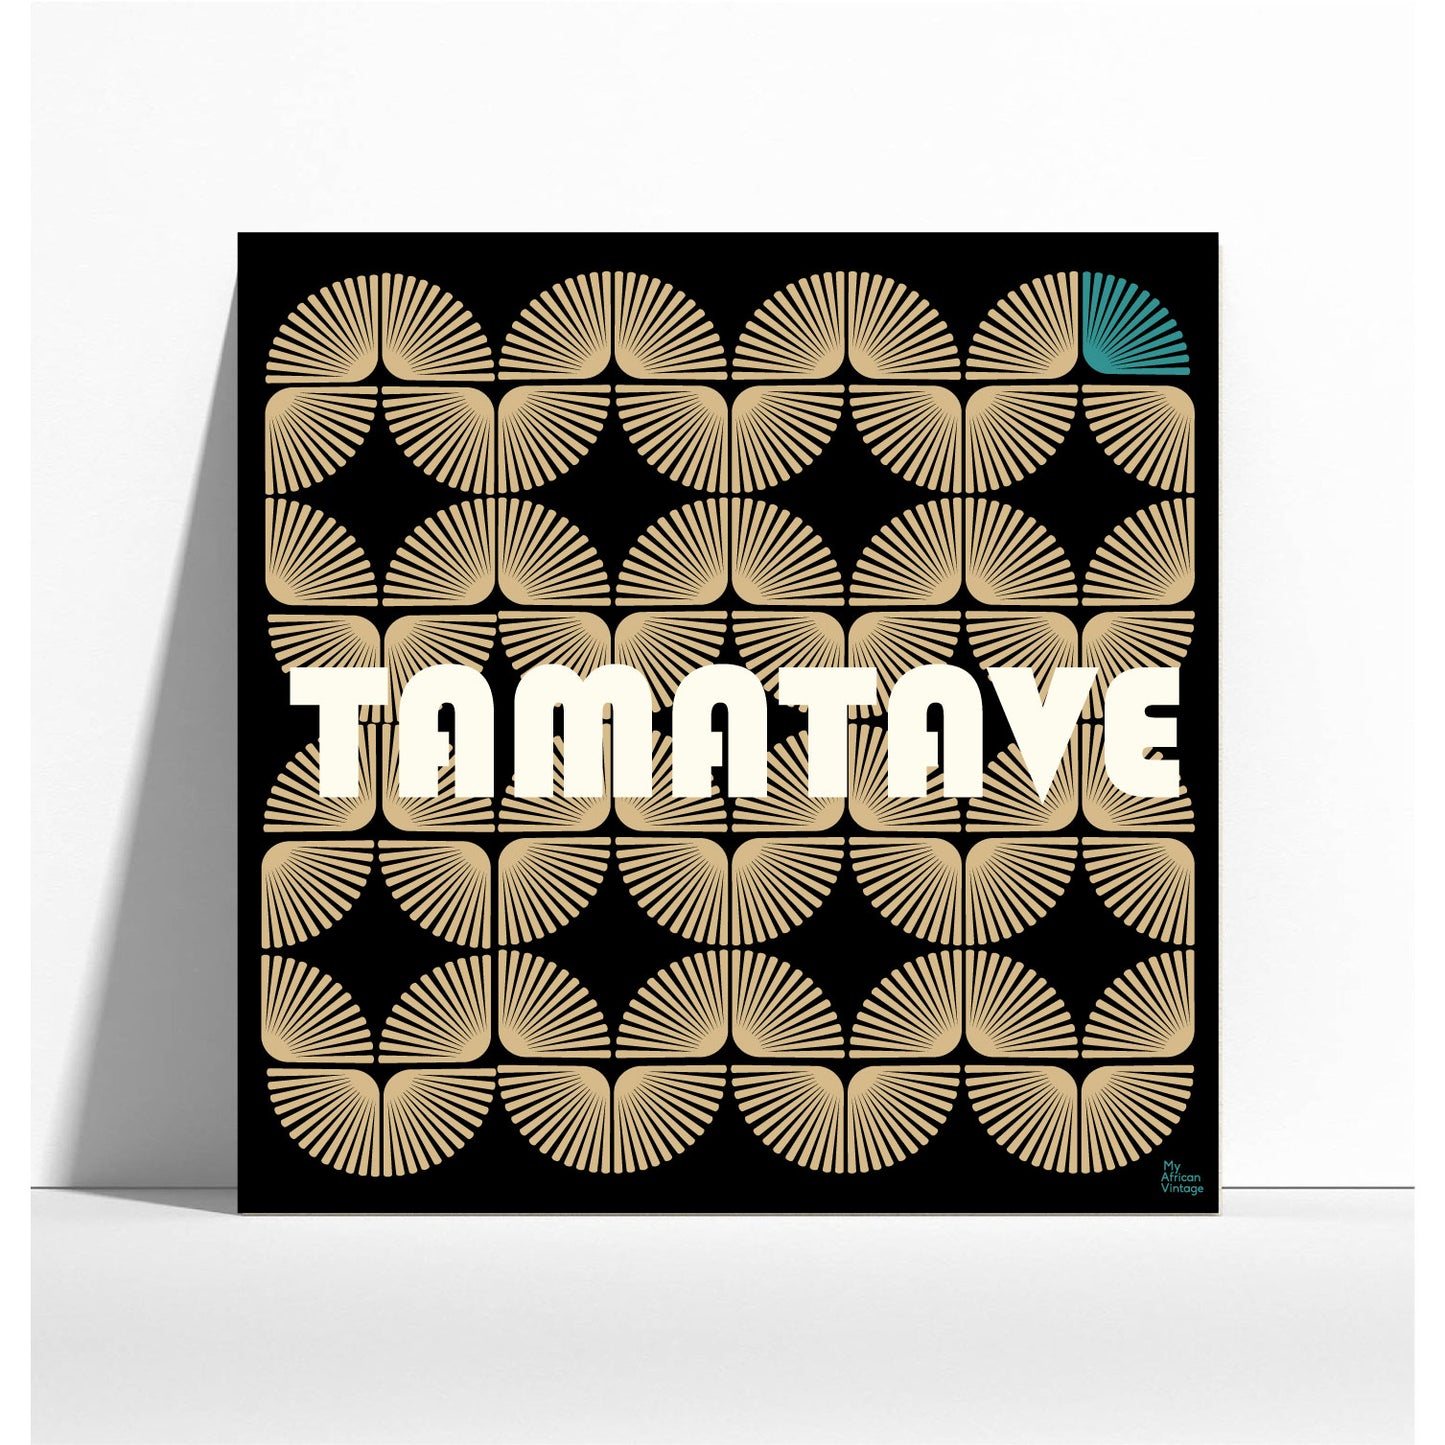 "Tamatave" retro style poster - "My African Vintage" collection